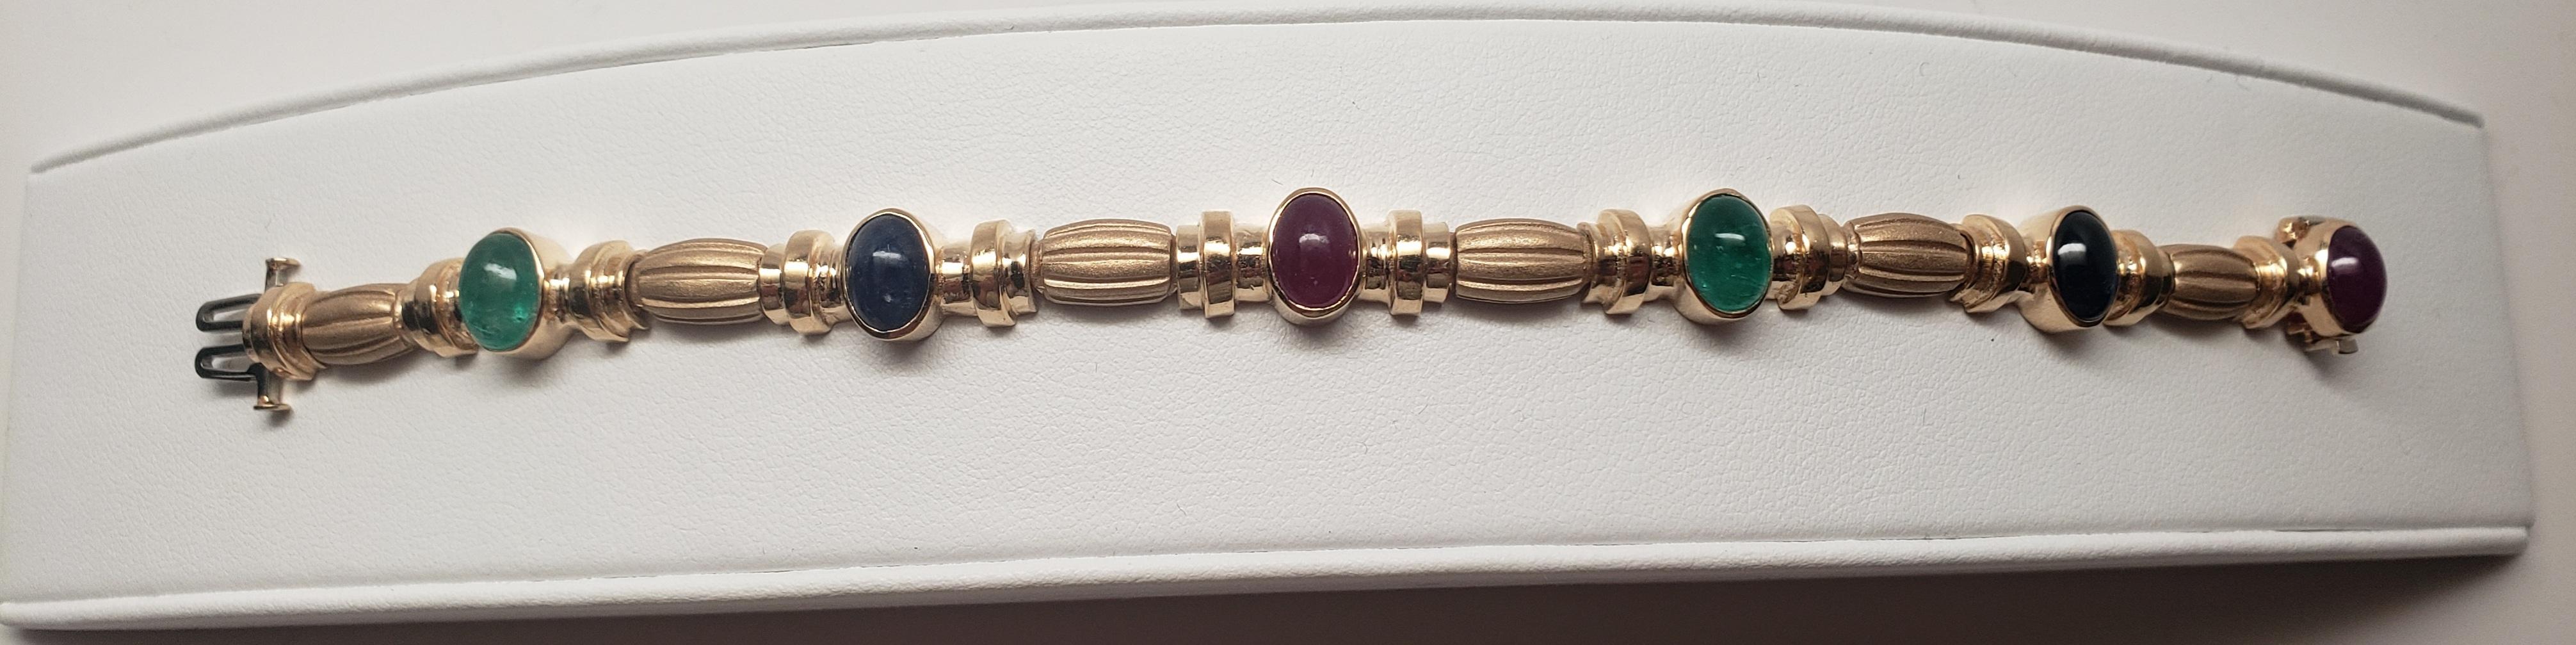 NEW Natural Ruby, Sapphire, Emerald Bracelet in 14k Solid Yellow Gold New For Sale 4